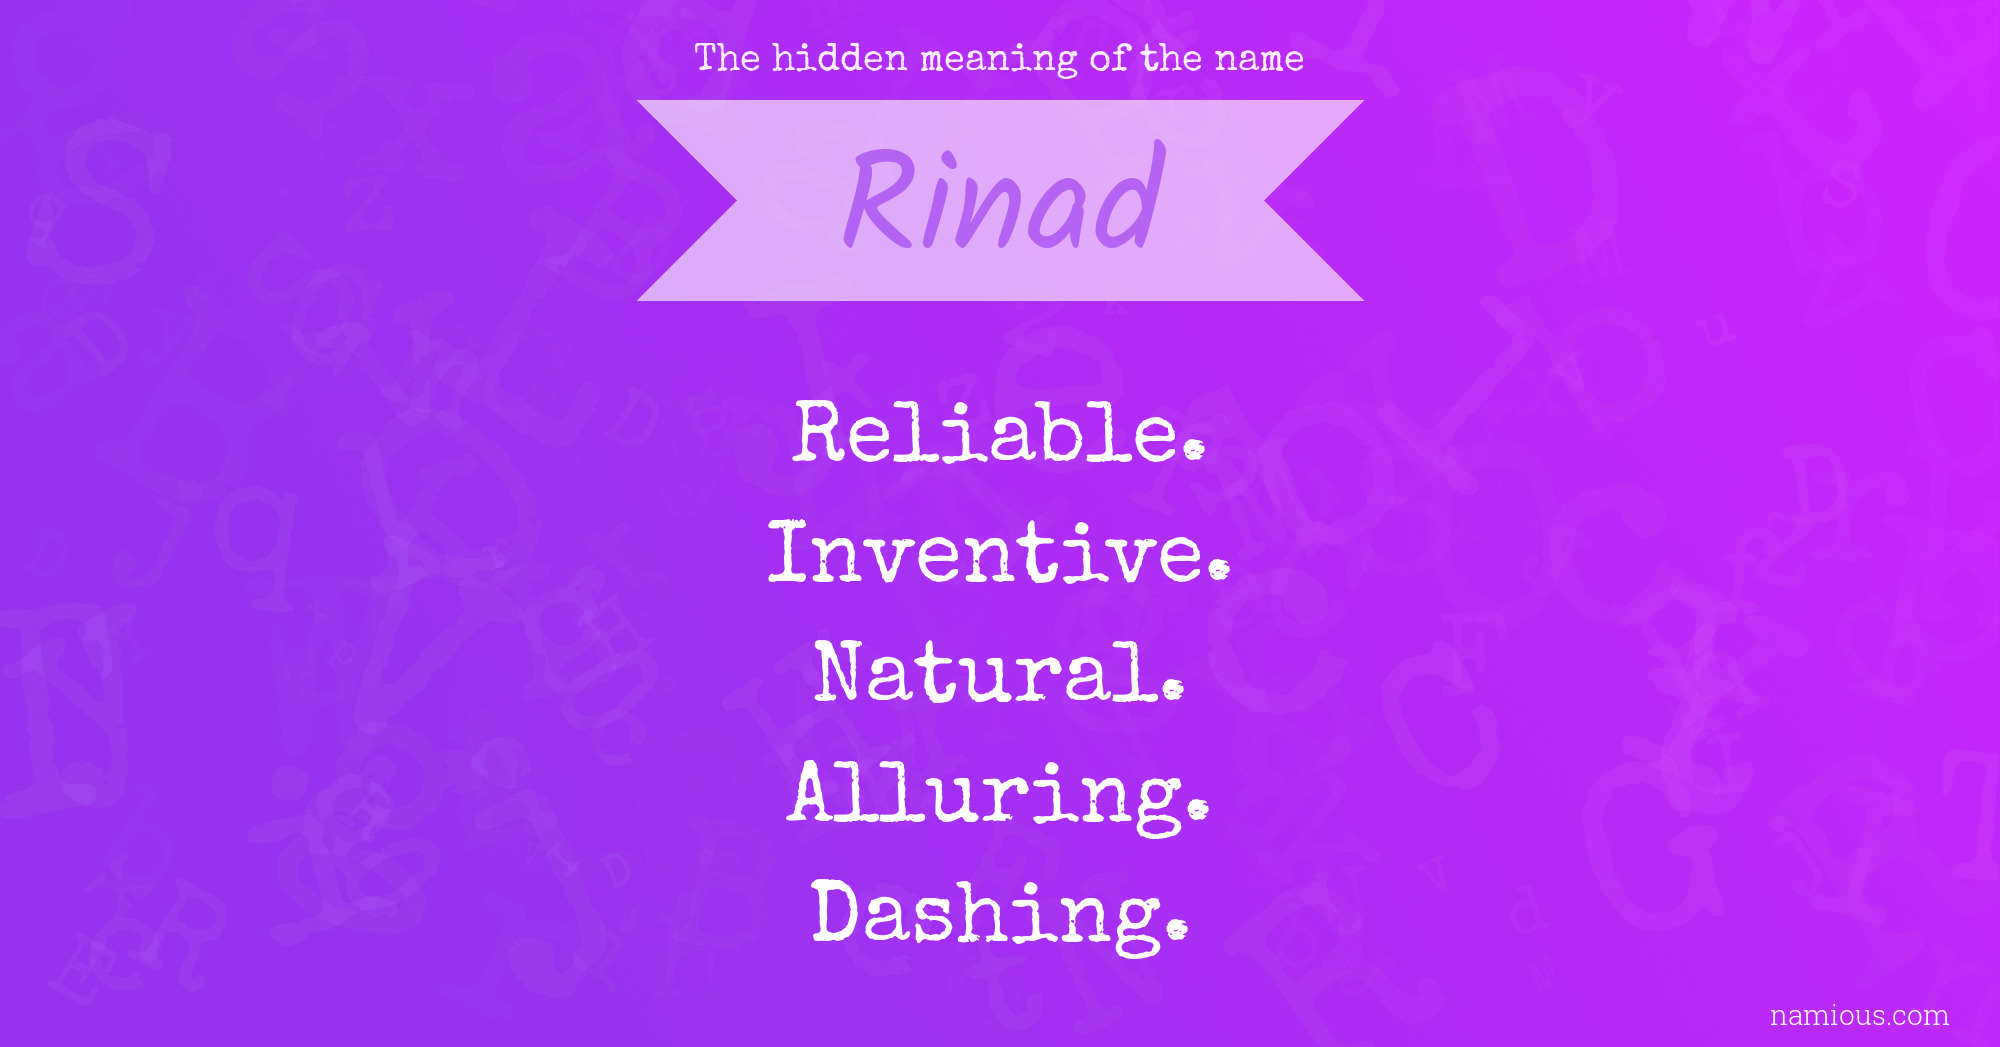 The hidden meaning of the name Rinad